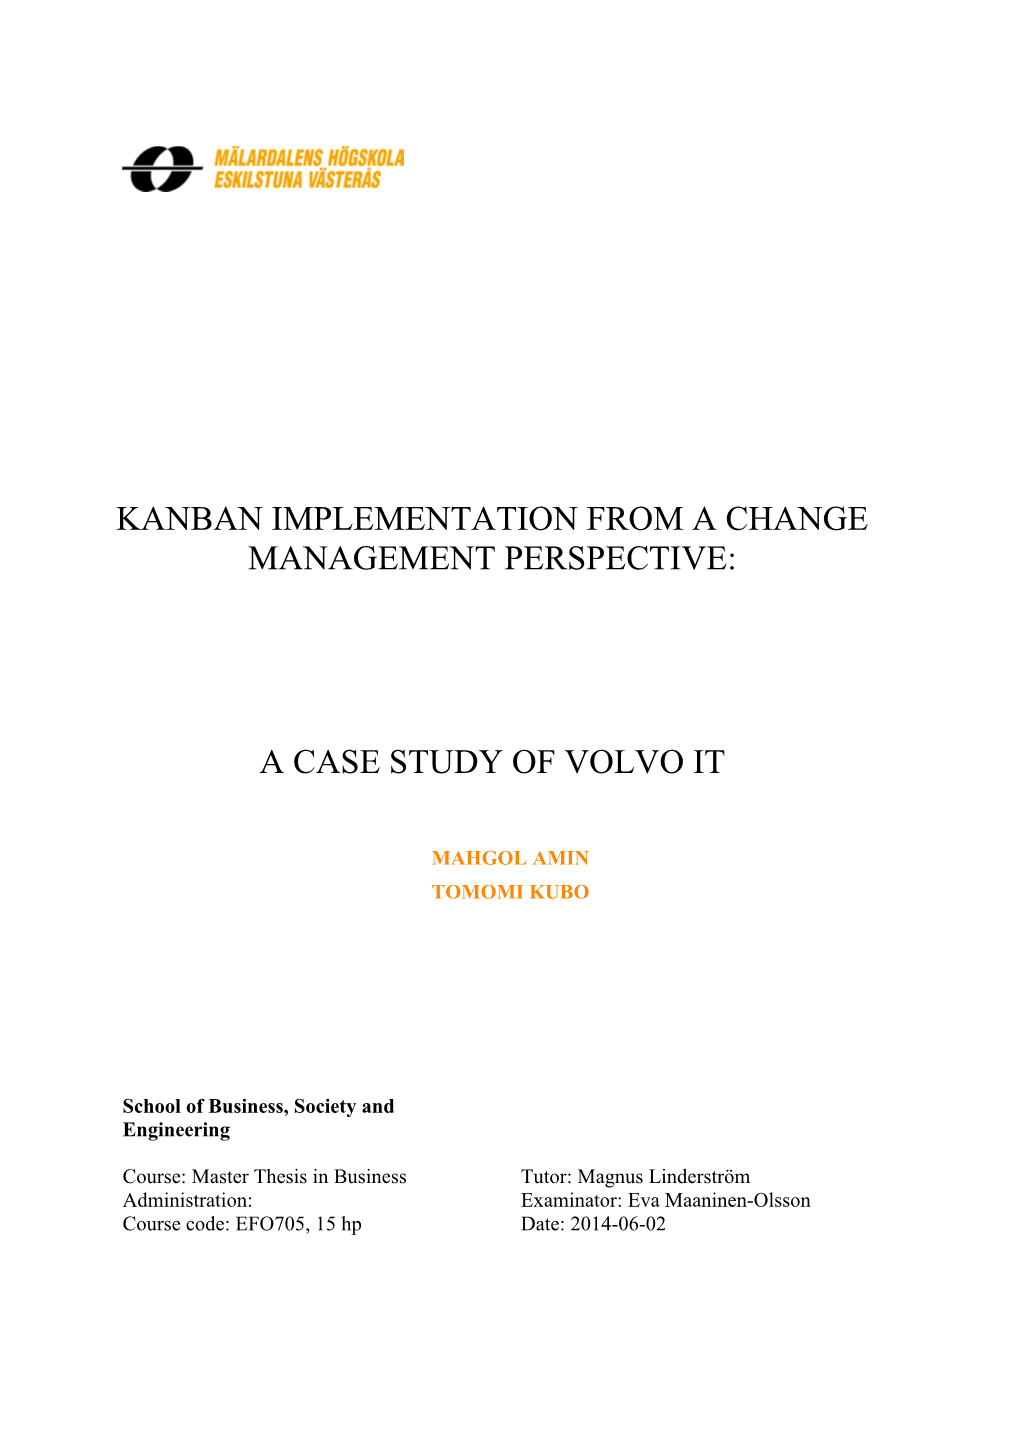 Kanban Implementation from a Change Management Perspective